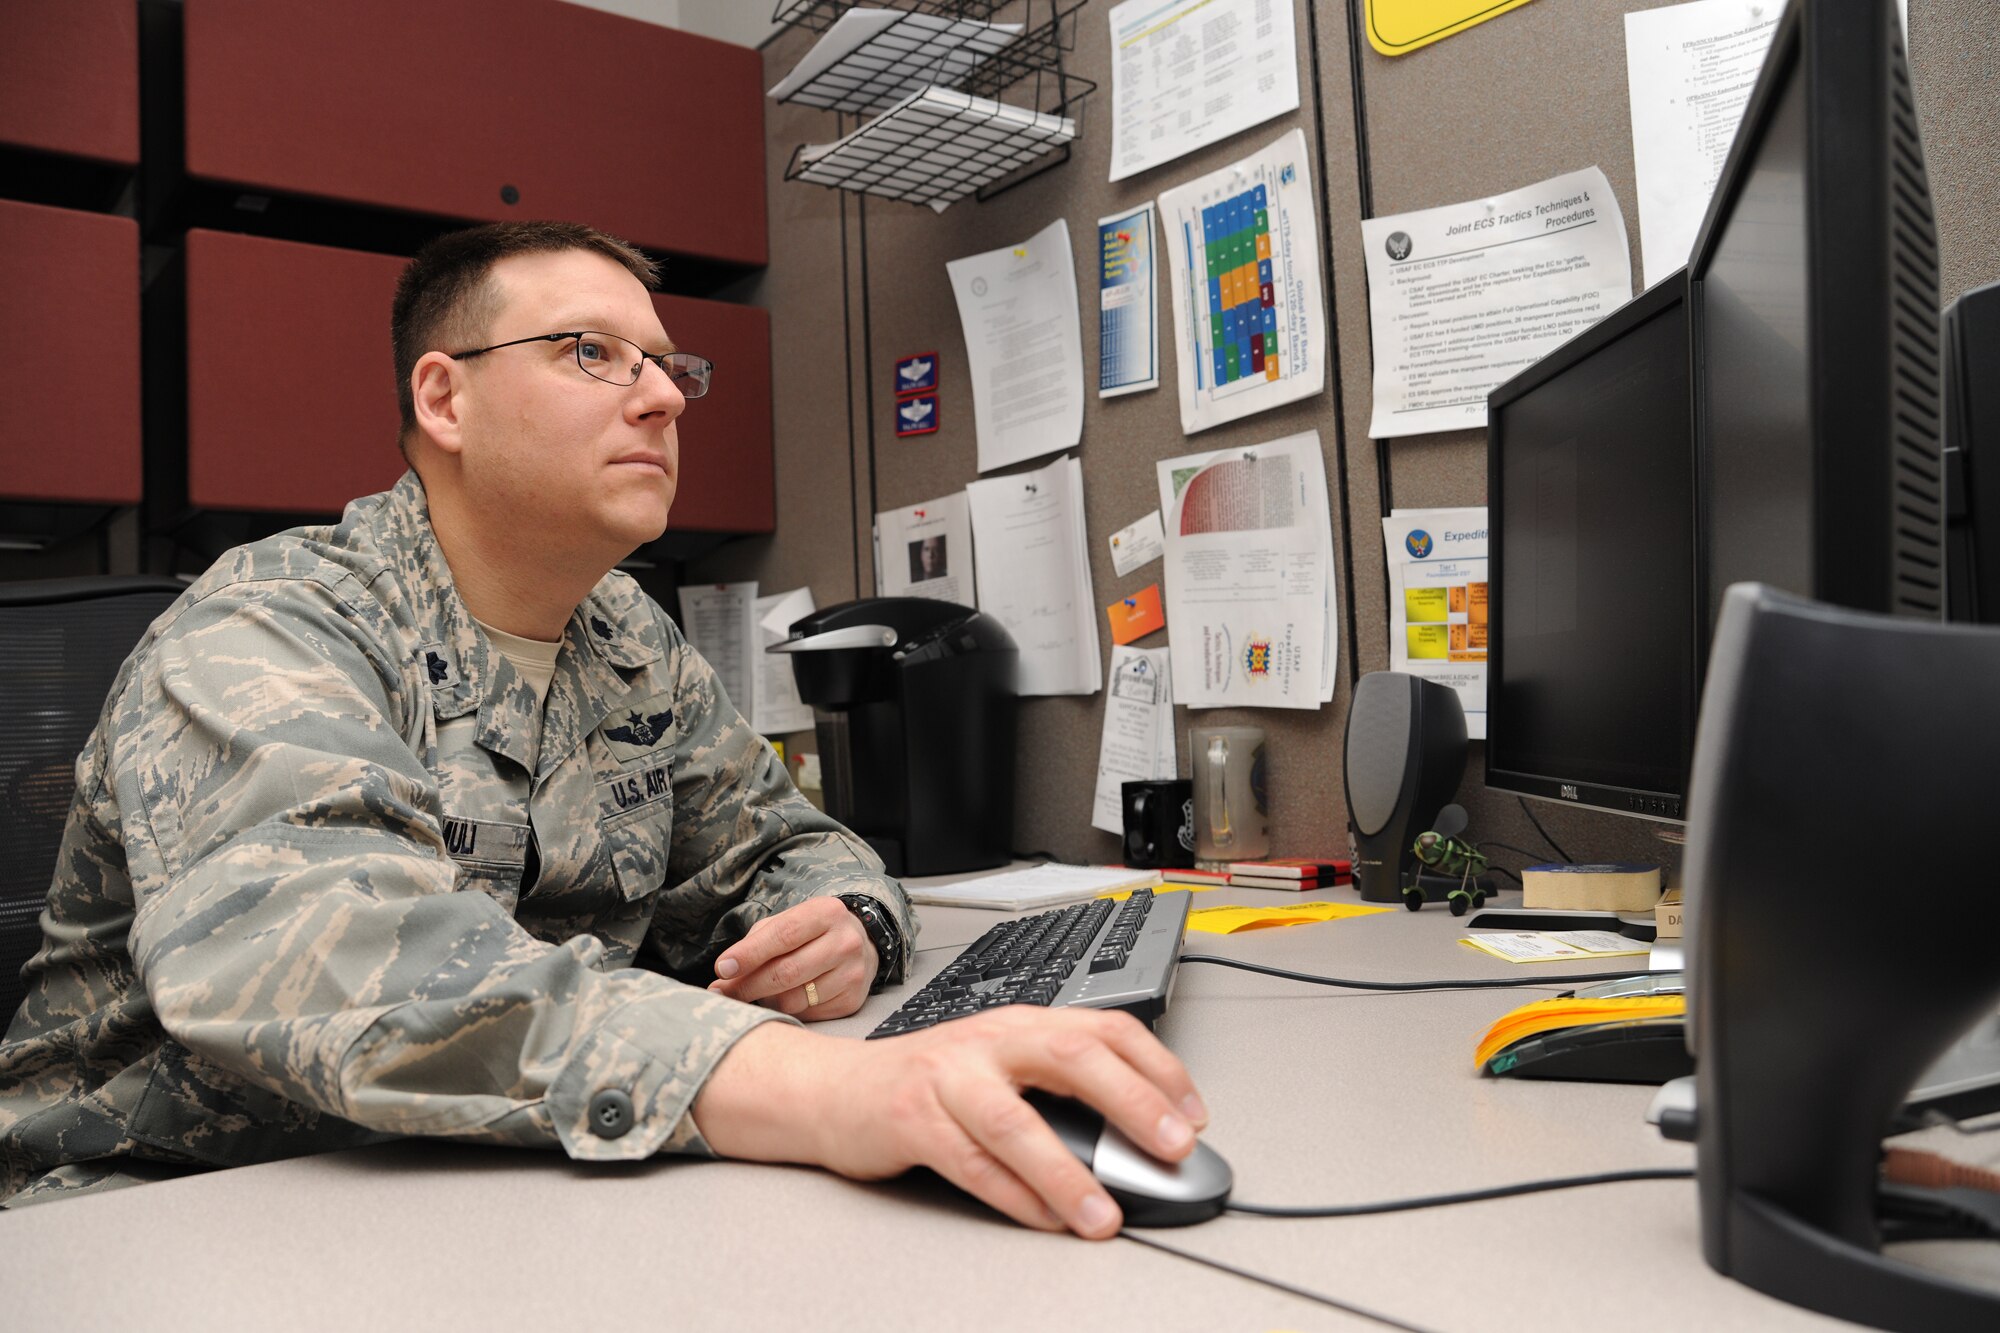 Lt. Col. Ralph Muli, U.S. Air Force Expeditionary Center chief of Tactics, Techniques and Procedures Division, works at his computer March 17, sorting through details of standing up the 422 Joint Tactics Squadron that will be assigned to the Expeditionary Center.  The squadron will fall under the Expeditionary Center's Expeditionary Operations School with its sister squadron, the 421 Combat Training Squadron.  The ceremony is scheduled for March 26. (U.S. Air Force Photo/Staff Sgt. Nathan G. Bevier)